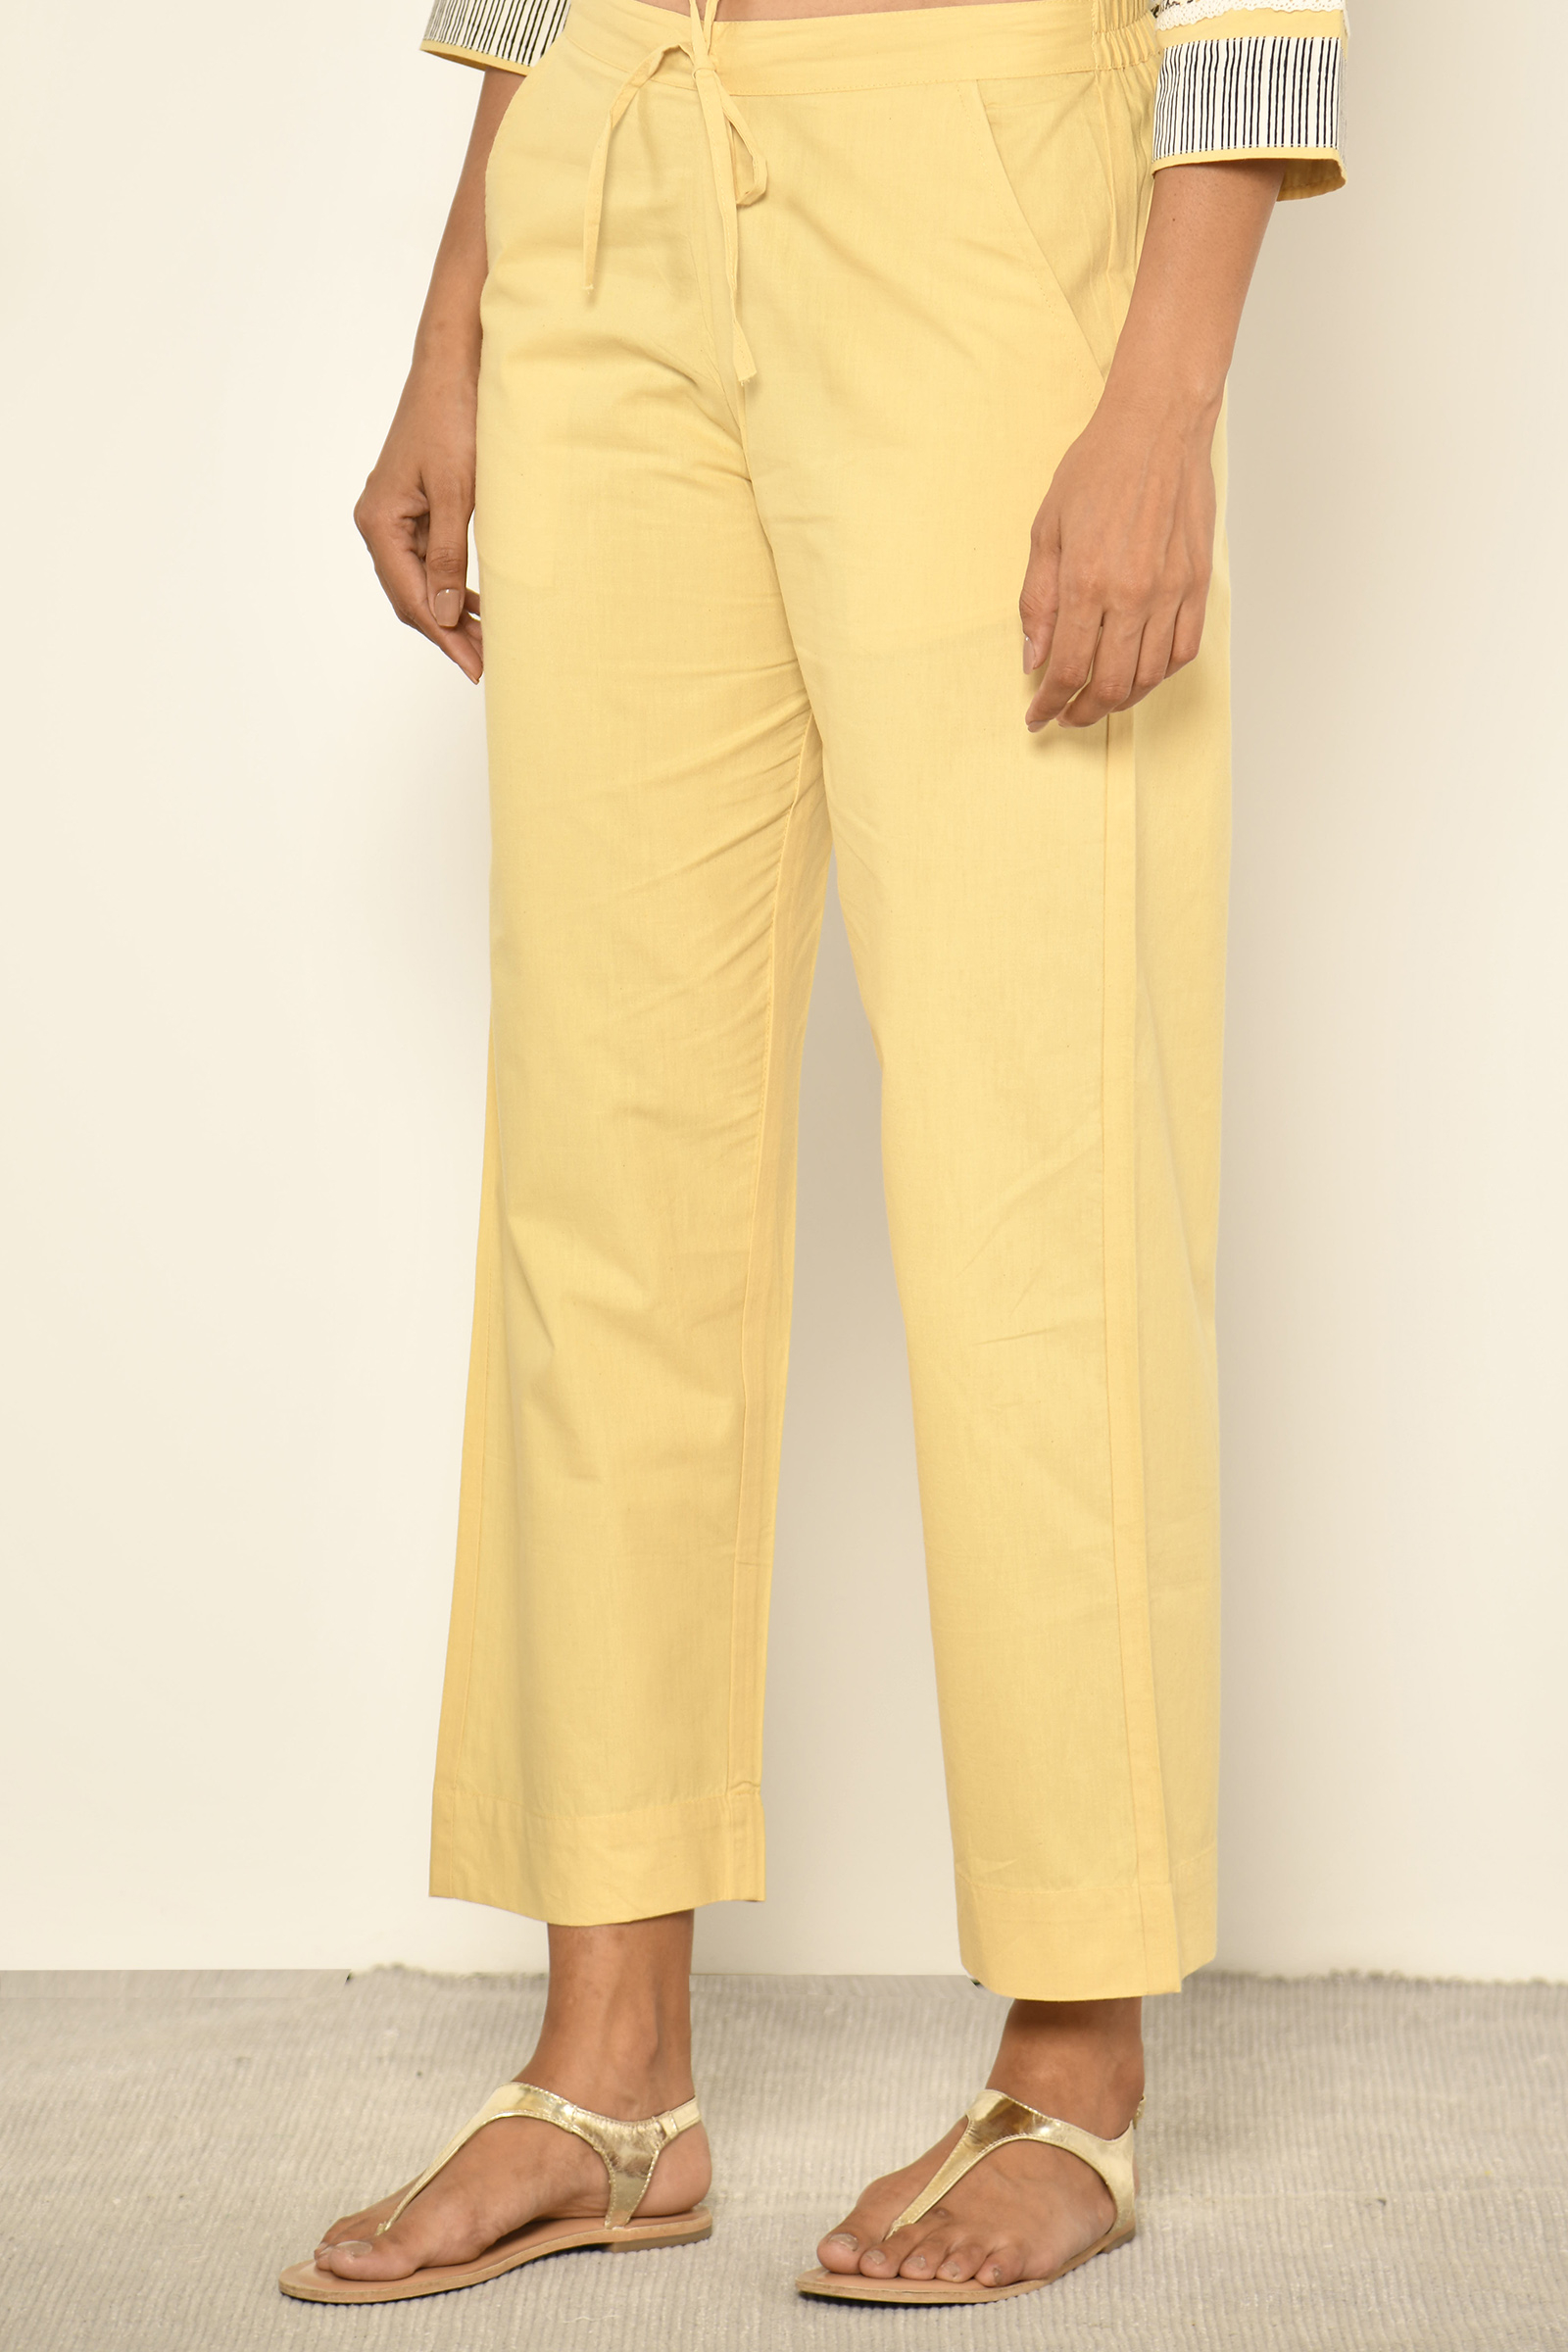 Buy Olive Green Straight Pants Online - W for Woman-mncb.edu.vn